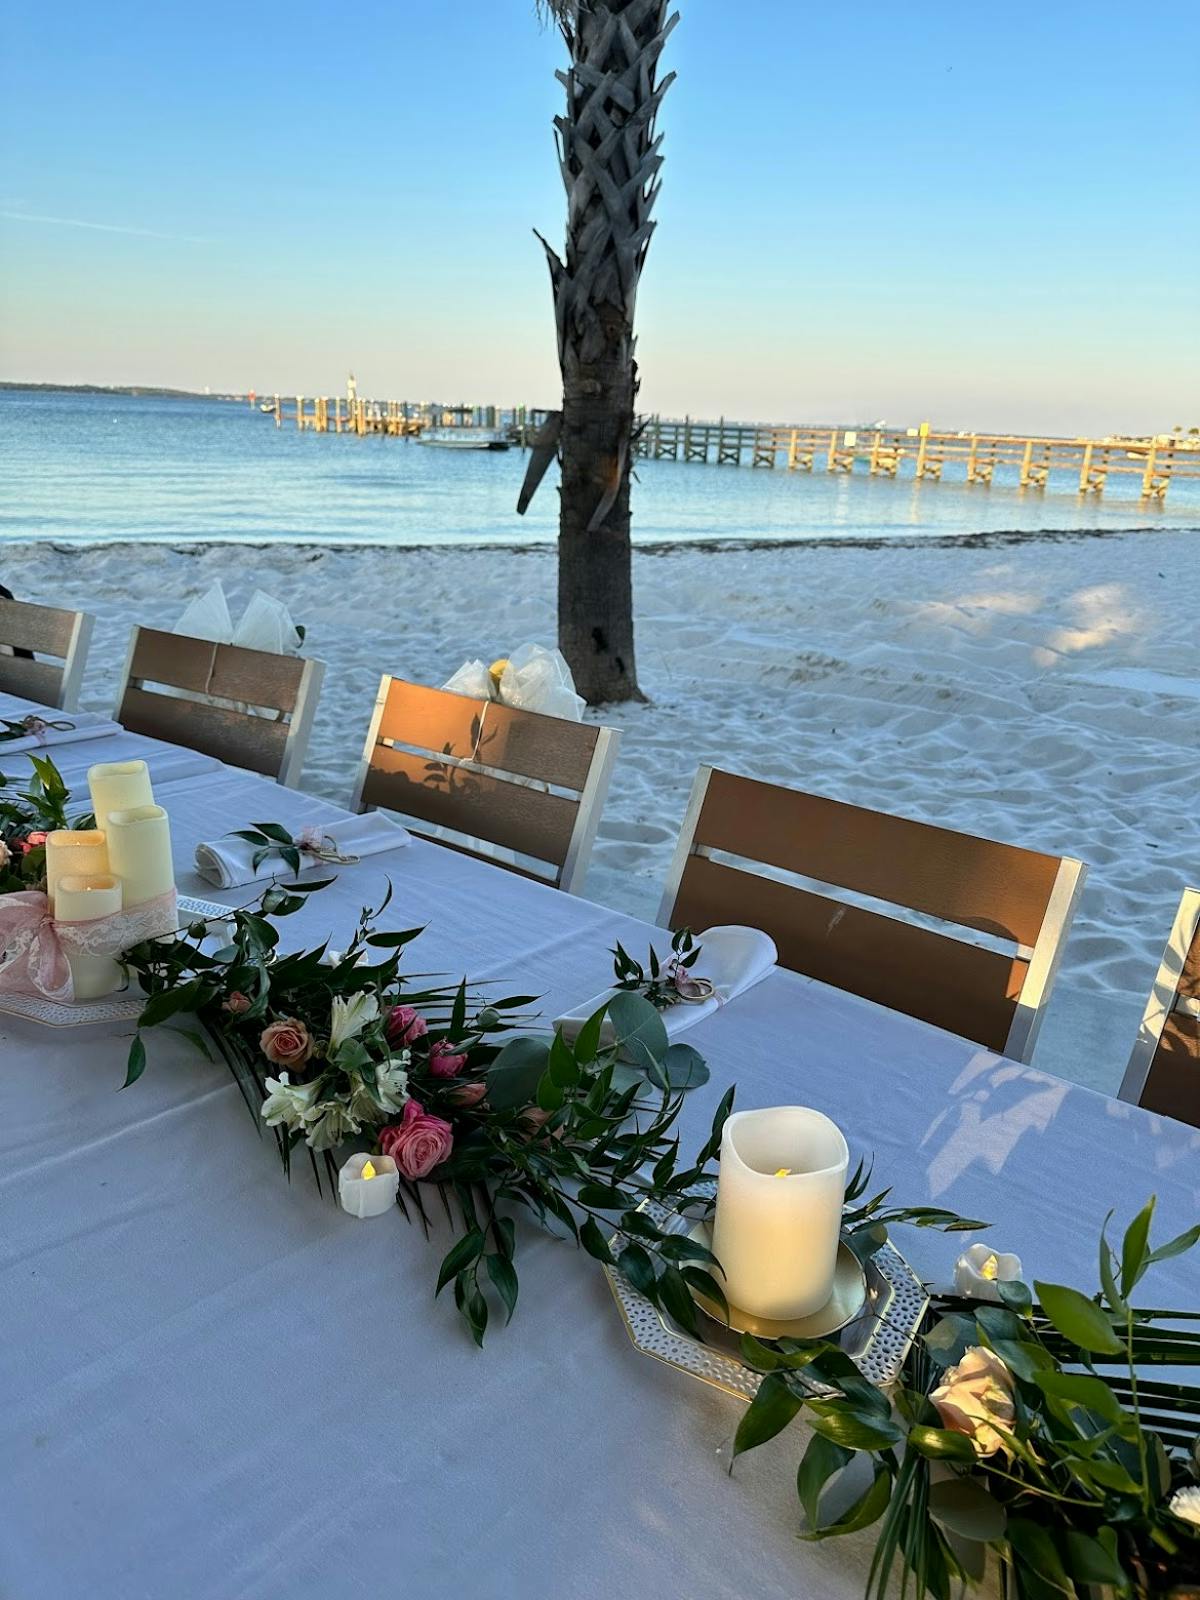 outdoor reception table on the beach